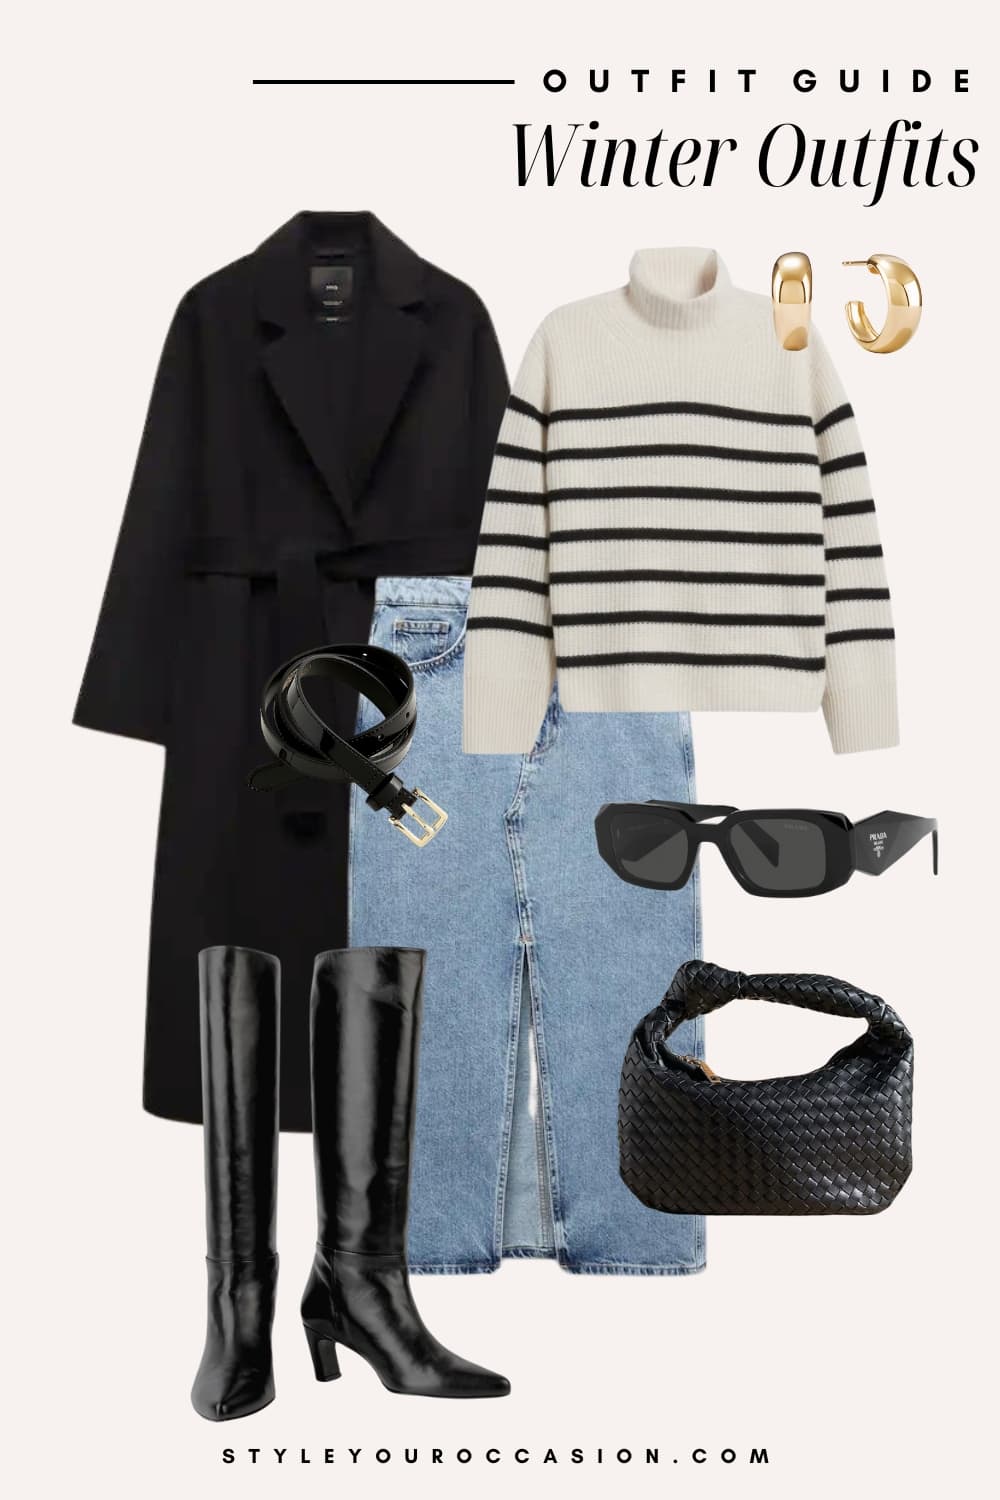 Flat lay outfit graphic of a denim maxi skirt, tall black boots, a black and white stripped sweater and a black coat with accessories.